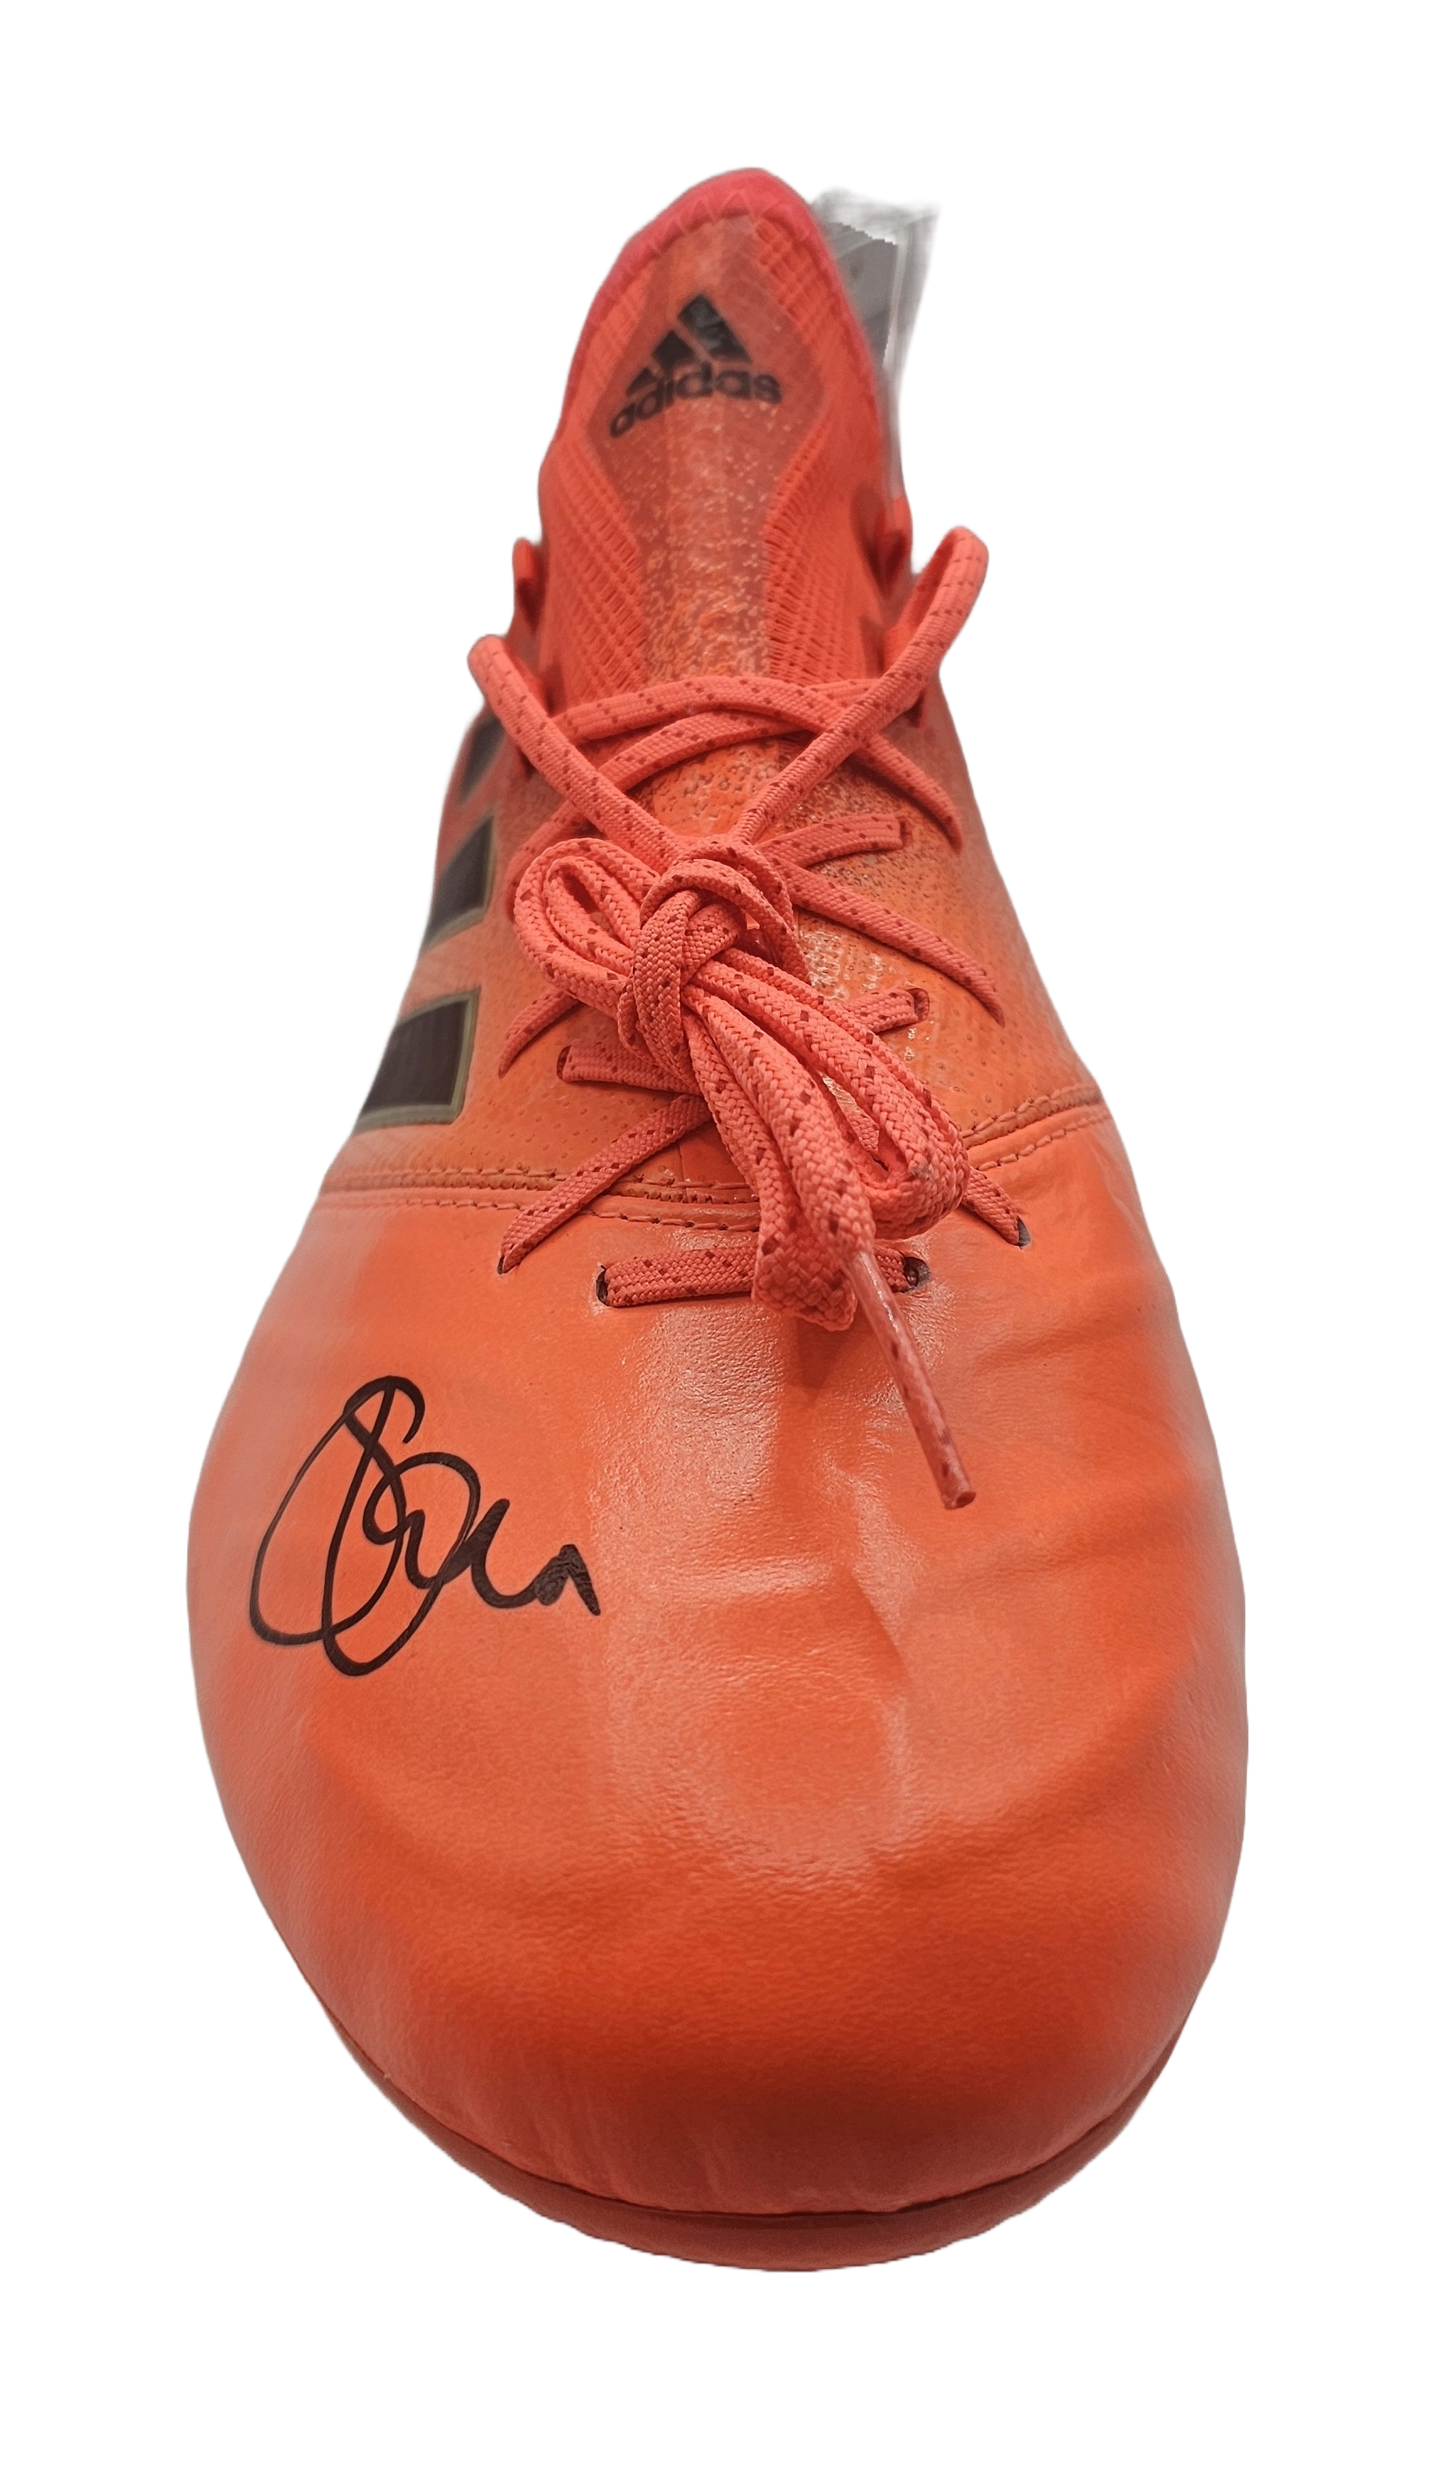 Scott Dann: Player Issued and Signed Boots